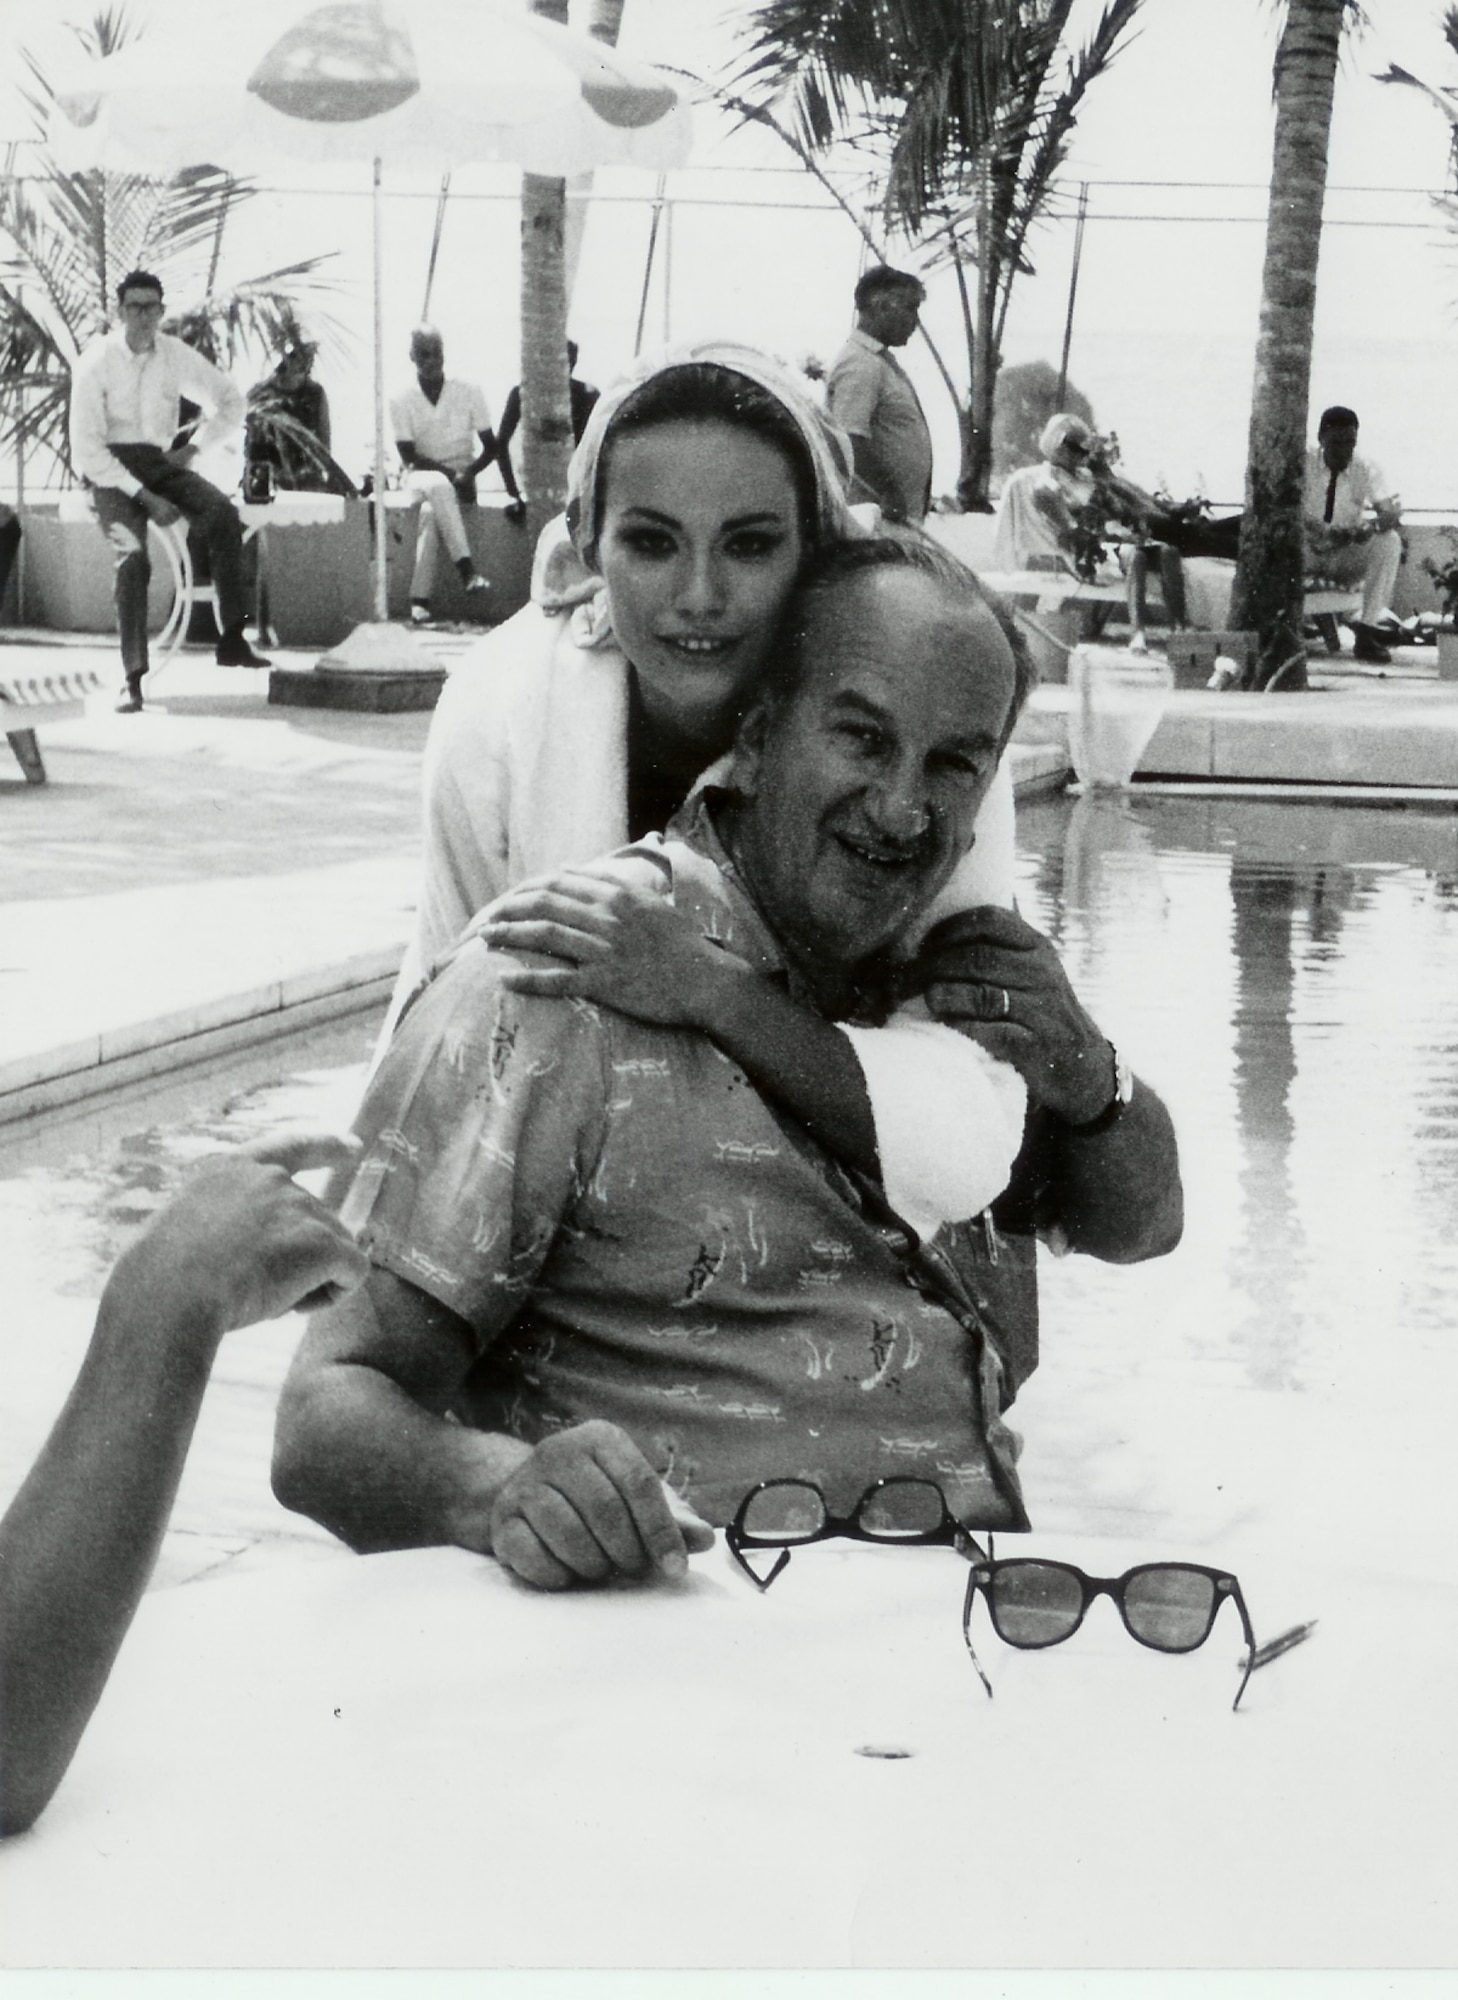 Retired Lieutenant Colonel Charles Russhon, one of the original Air Commandos and military advisor to the James Bond films in the ‘60s and ‘70s, hugs Claudine Auger, a Bond girl in “Thunderball” and former Miss France Monde, during the production of “Thunderball.” (Photo courtesy of Christian Russhon)